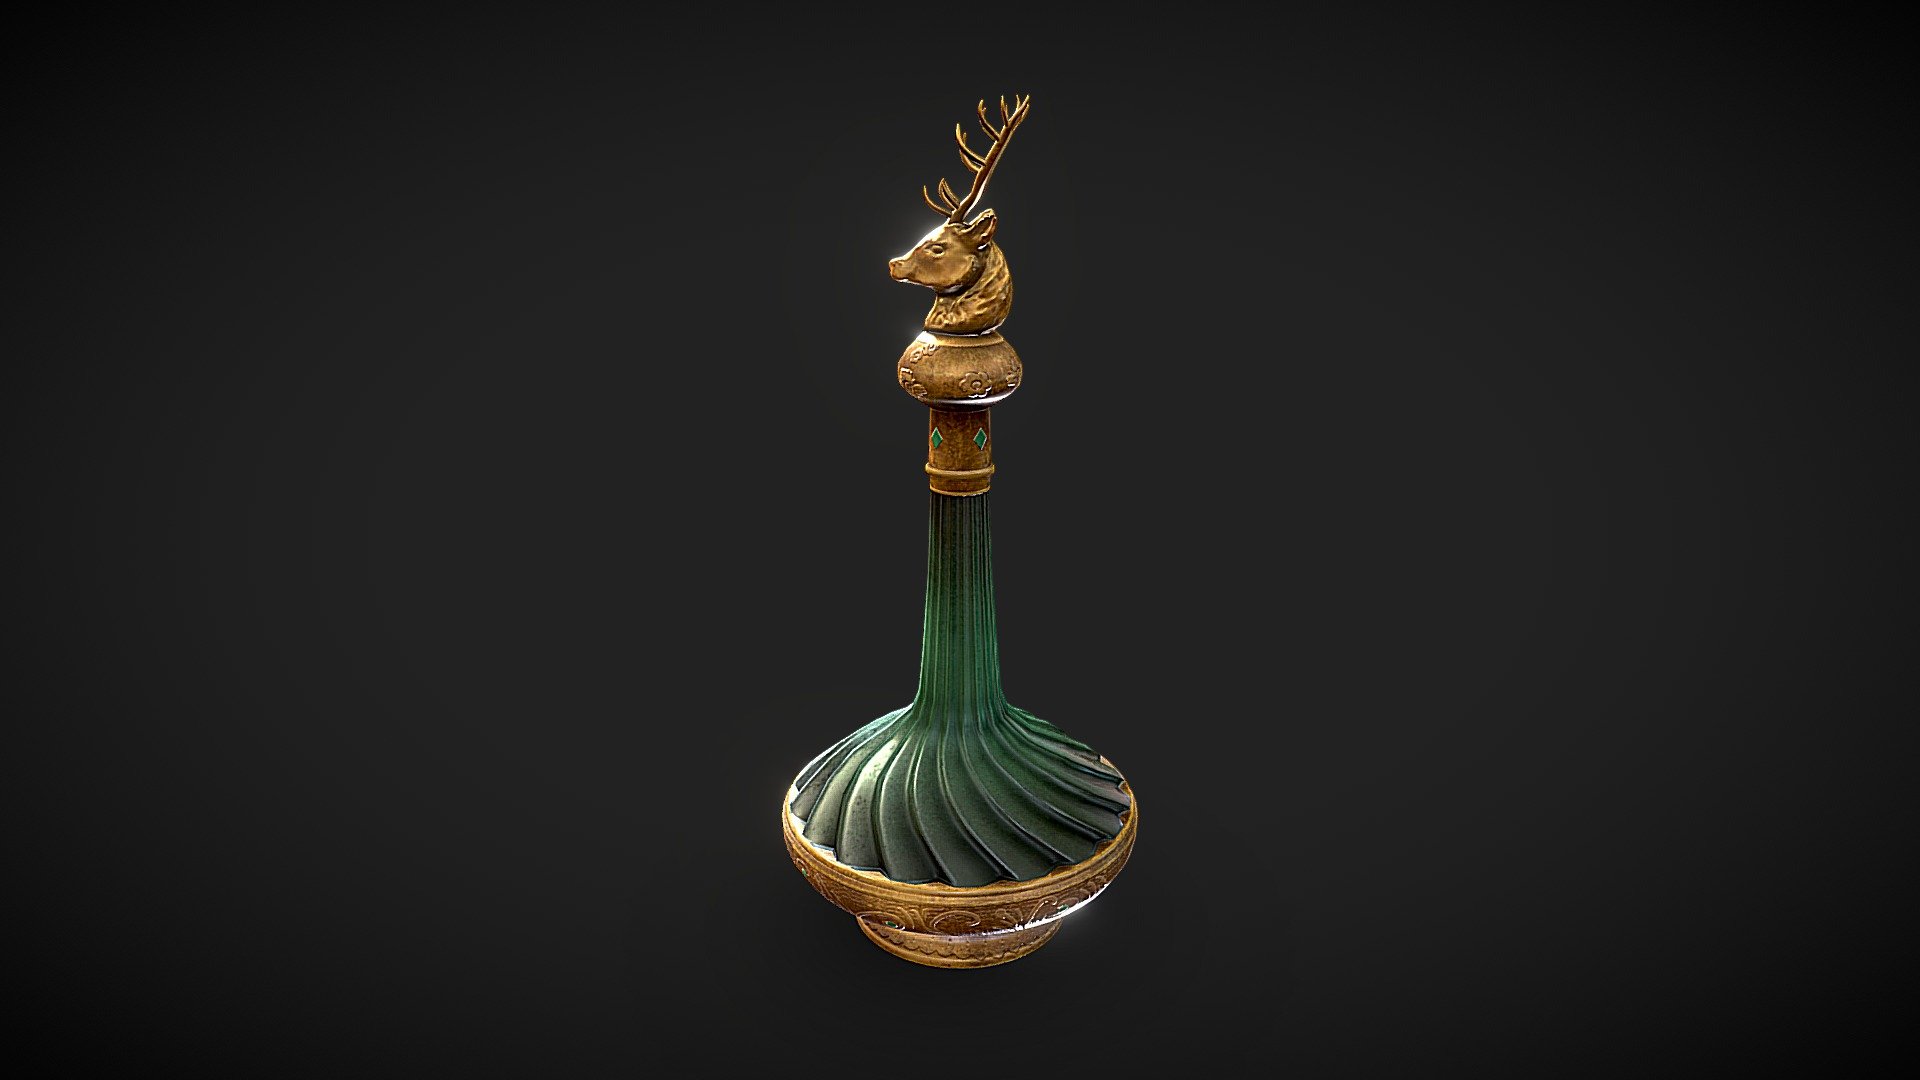 For a school assignment, we had to make 3D fanart of an item from a game/movie.
I chose the Potion of Animal Speaking from Baldur's Gate 3 3d model